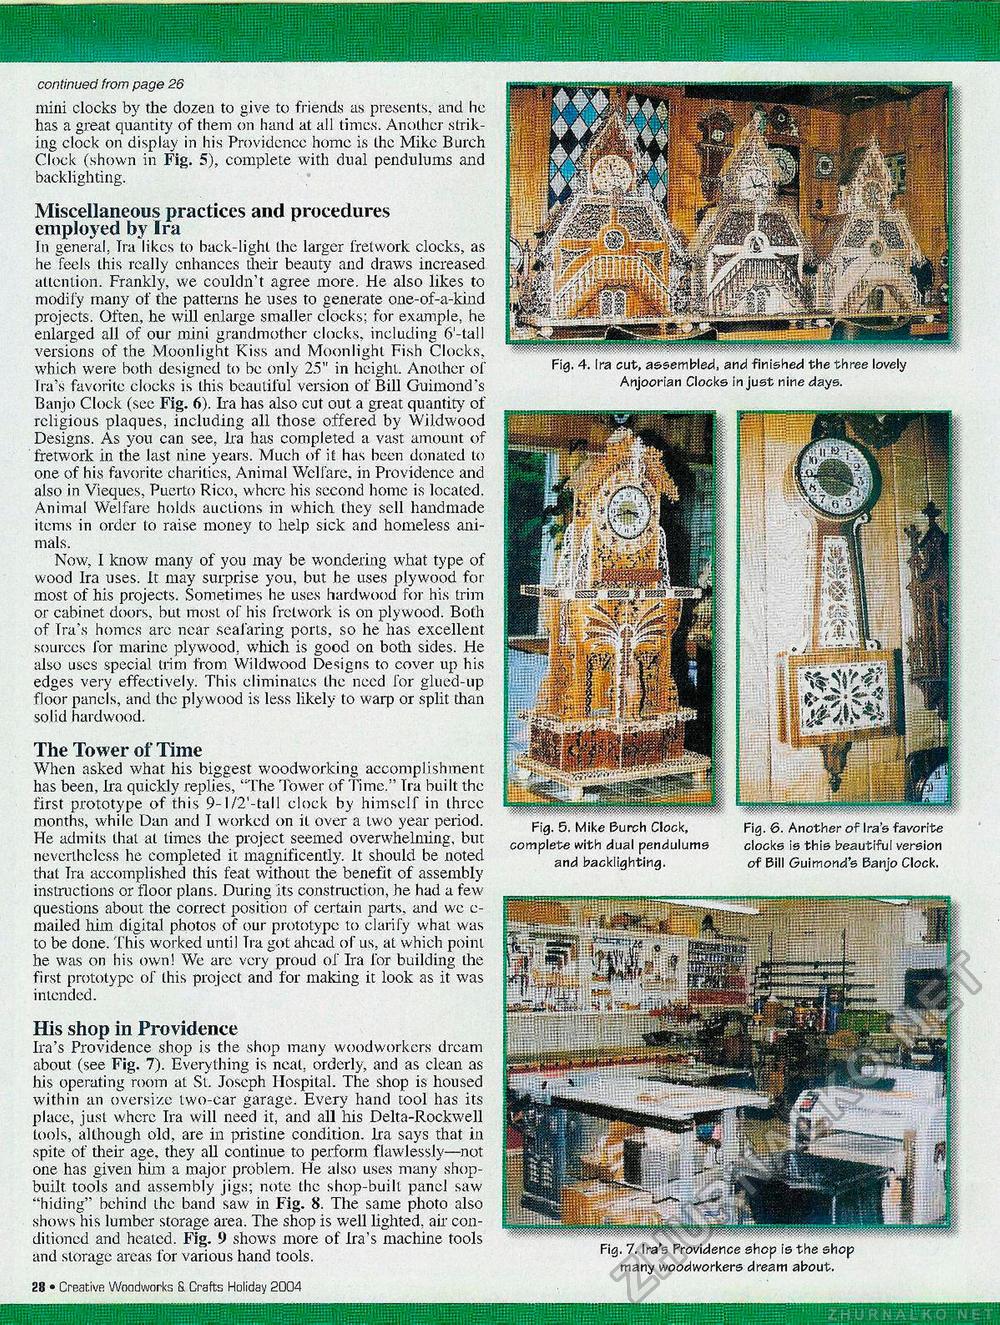 Creative Woodworks  & crafts-103-2004-Holiday,  28